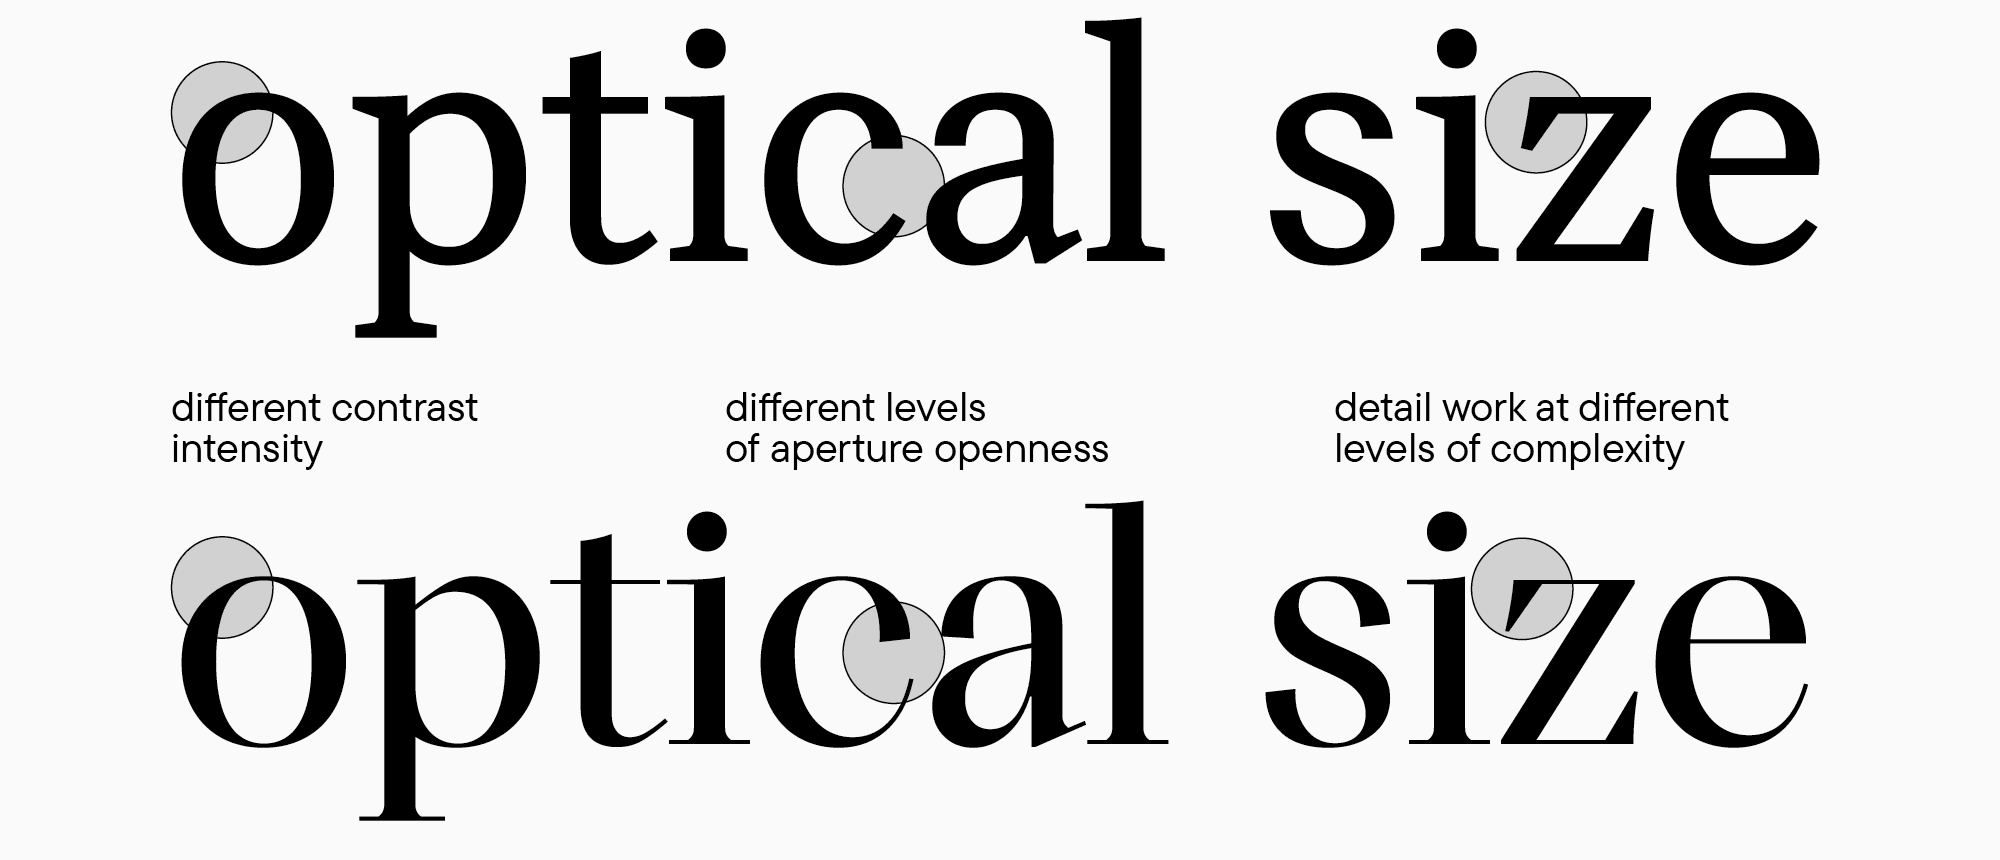 UniversiTTy: Lesson 7. Designing Basic Latin Characters. Glyph Height, Contrast, Optical Sizes